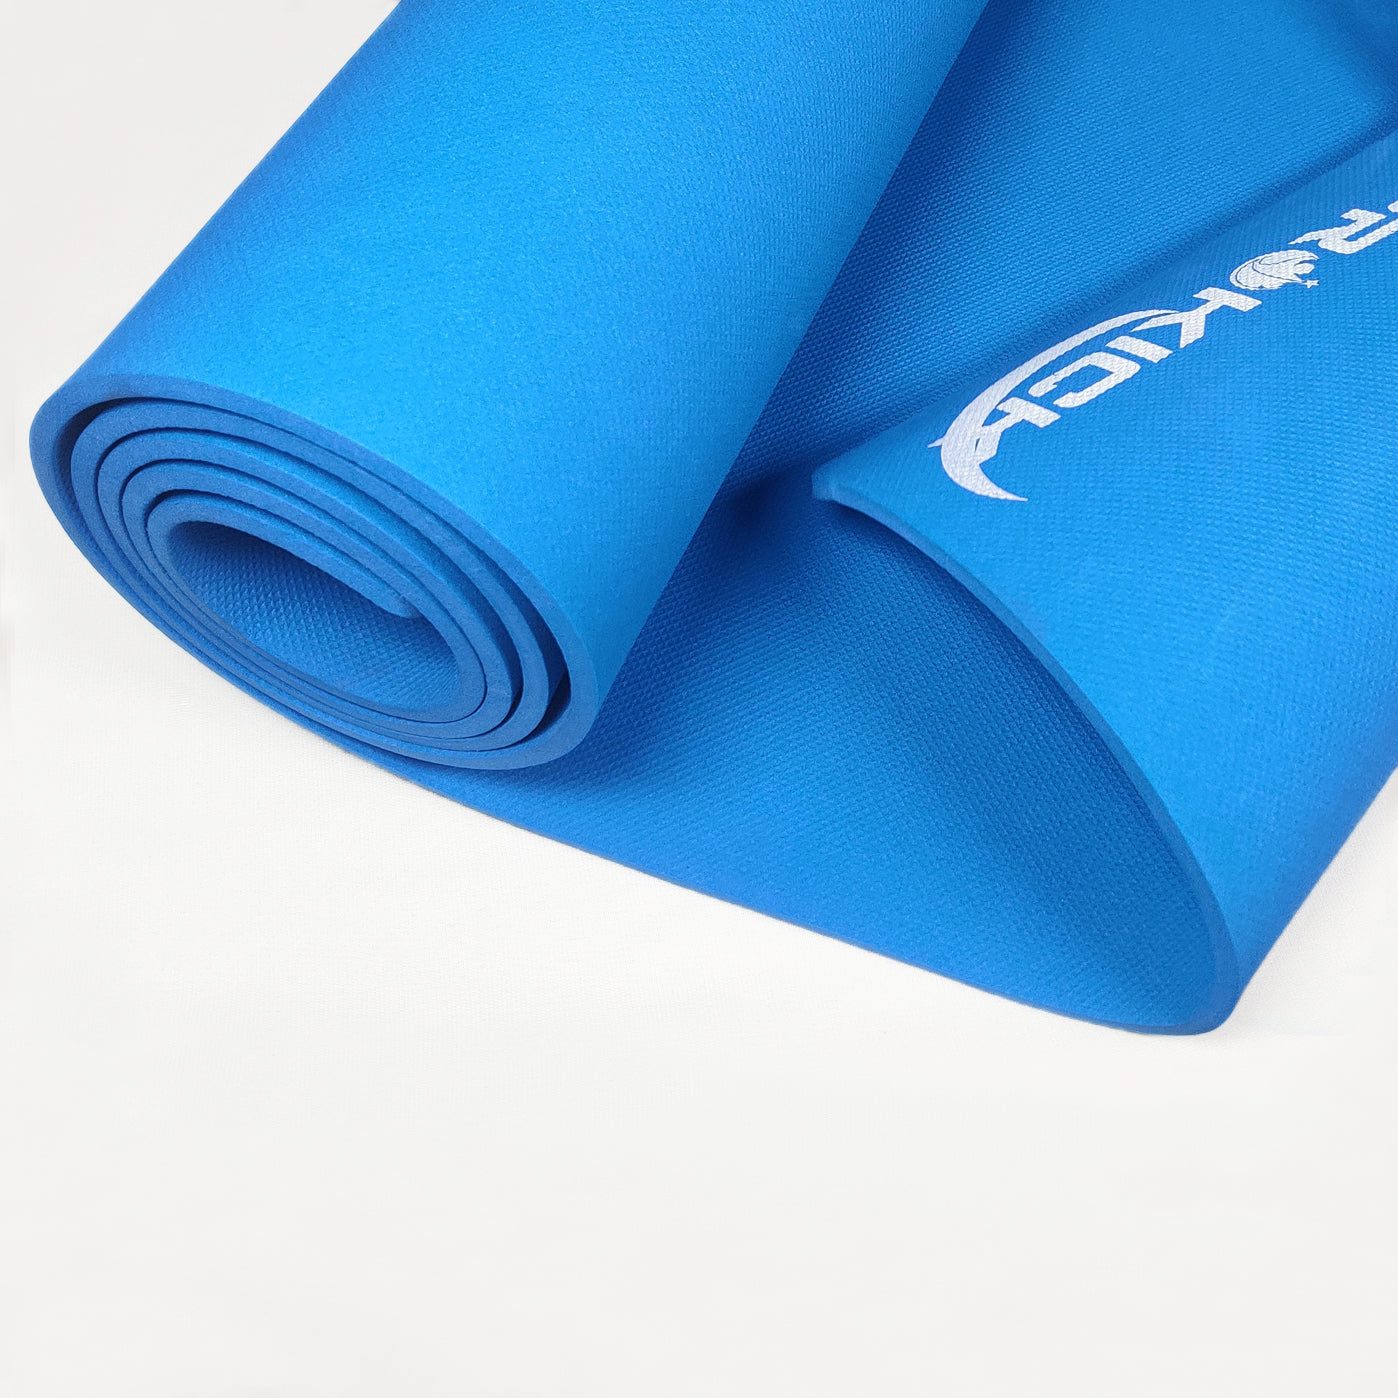 Buy Anti-Skid EVA Classic 4mm Yoga Mat with Strap (Green) at 47% OFF Online